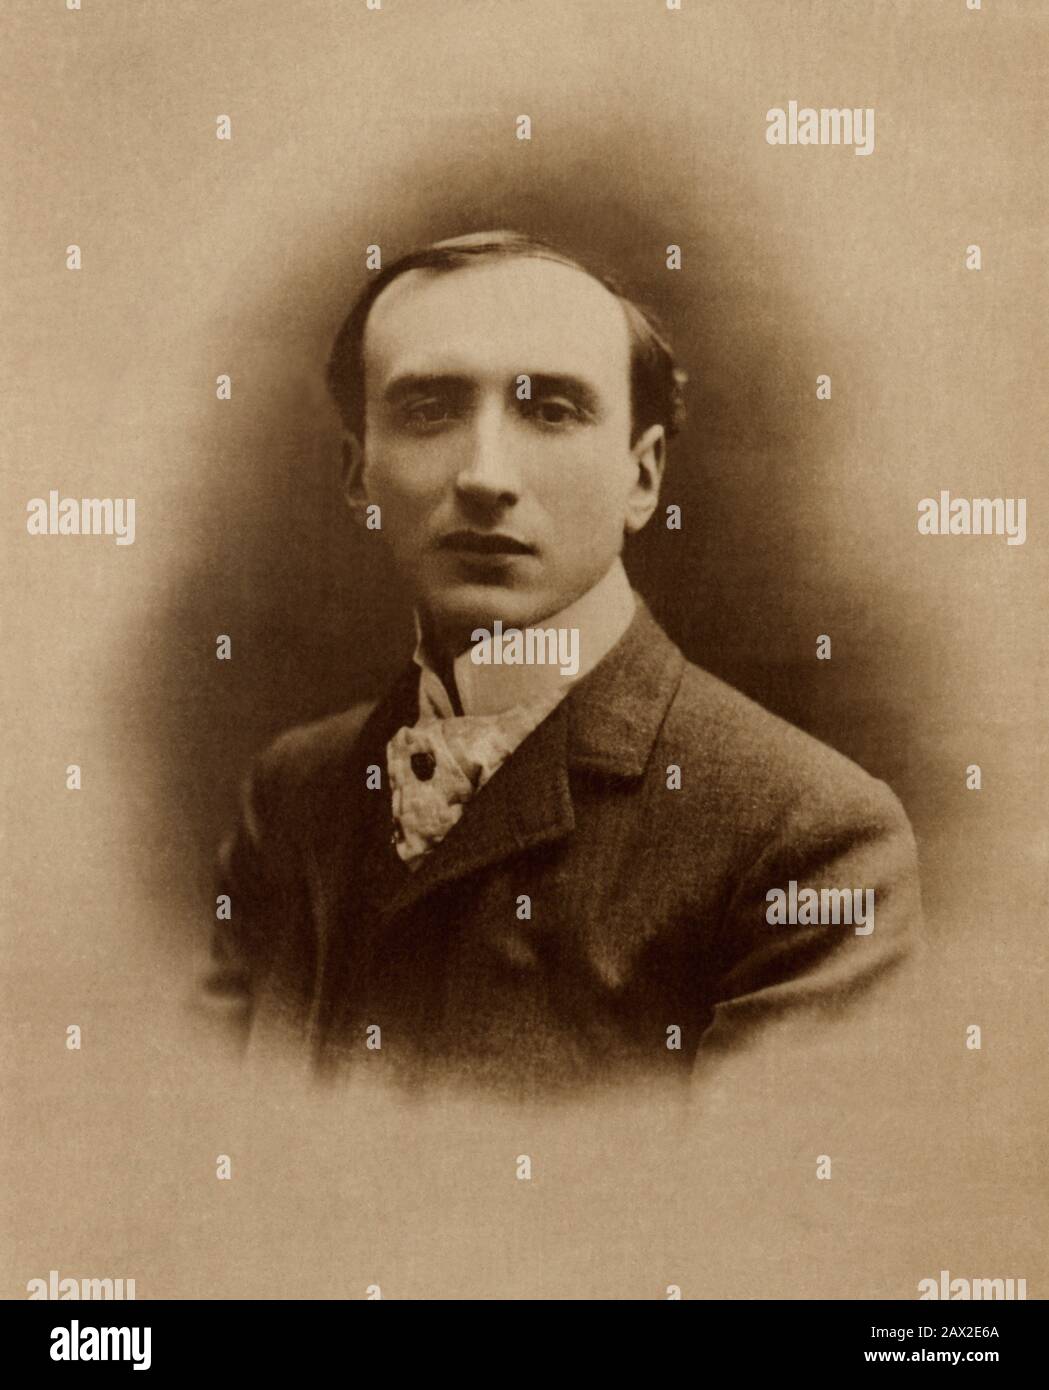 1895 ca , FRANCE : The french dramatist and poet HENRY BATAILLE  ( 1872 - 1922 ). Photo by Pirou , Paris . His works were extremely popular between 1900 and the start of World War I. He went to the École des Beaux-Arts to study painting, but started writing when he was 14. Henry wrote plays and poems, but after the success of his second play, La Lépreuse, he became a playwright exclusively. Bataille's early works were about the effects of passion on human motivation and how stifling the social conventions of the times could be. For example, Maman Colibri, is about a middle-aged woman's affair Stock Photo